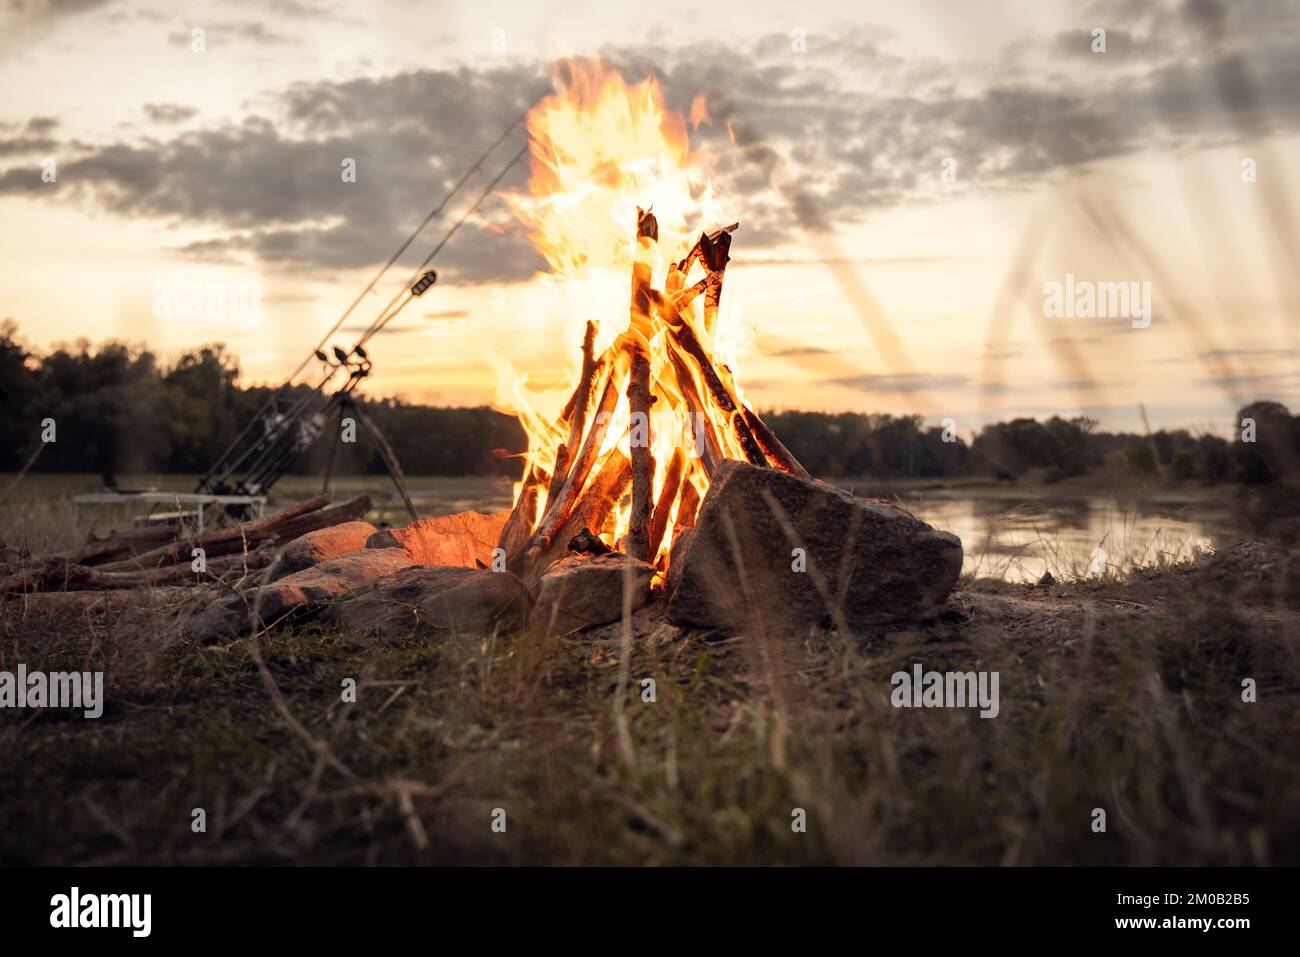 Campfire at a lake with fishing gear in the background Stock Photo